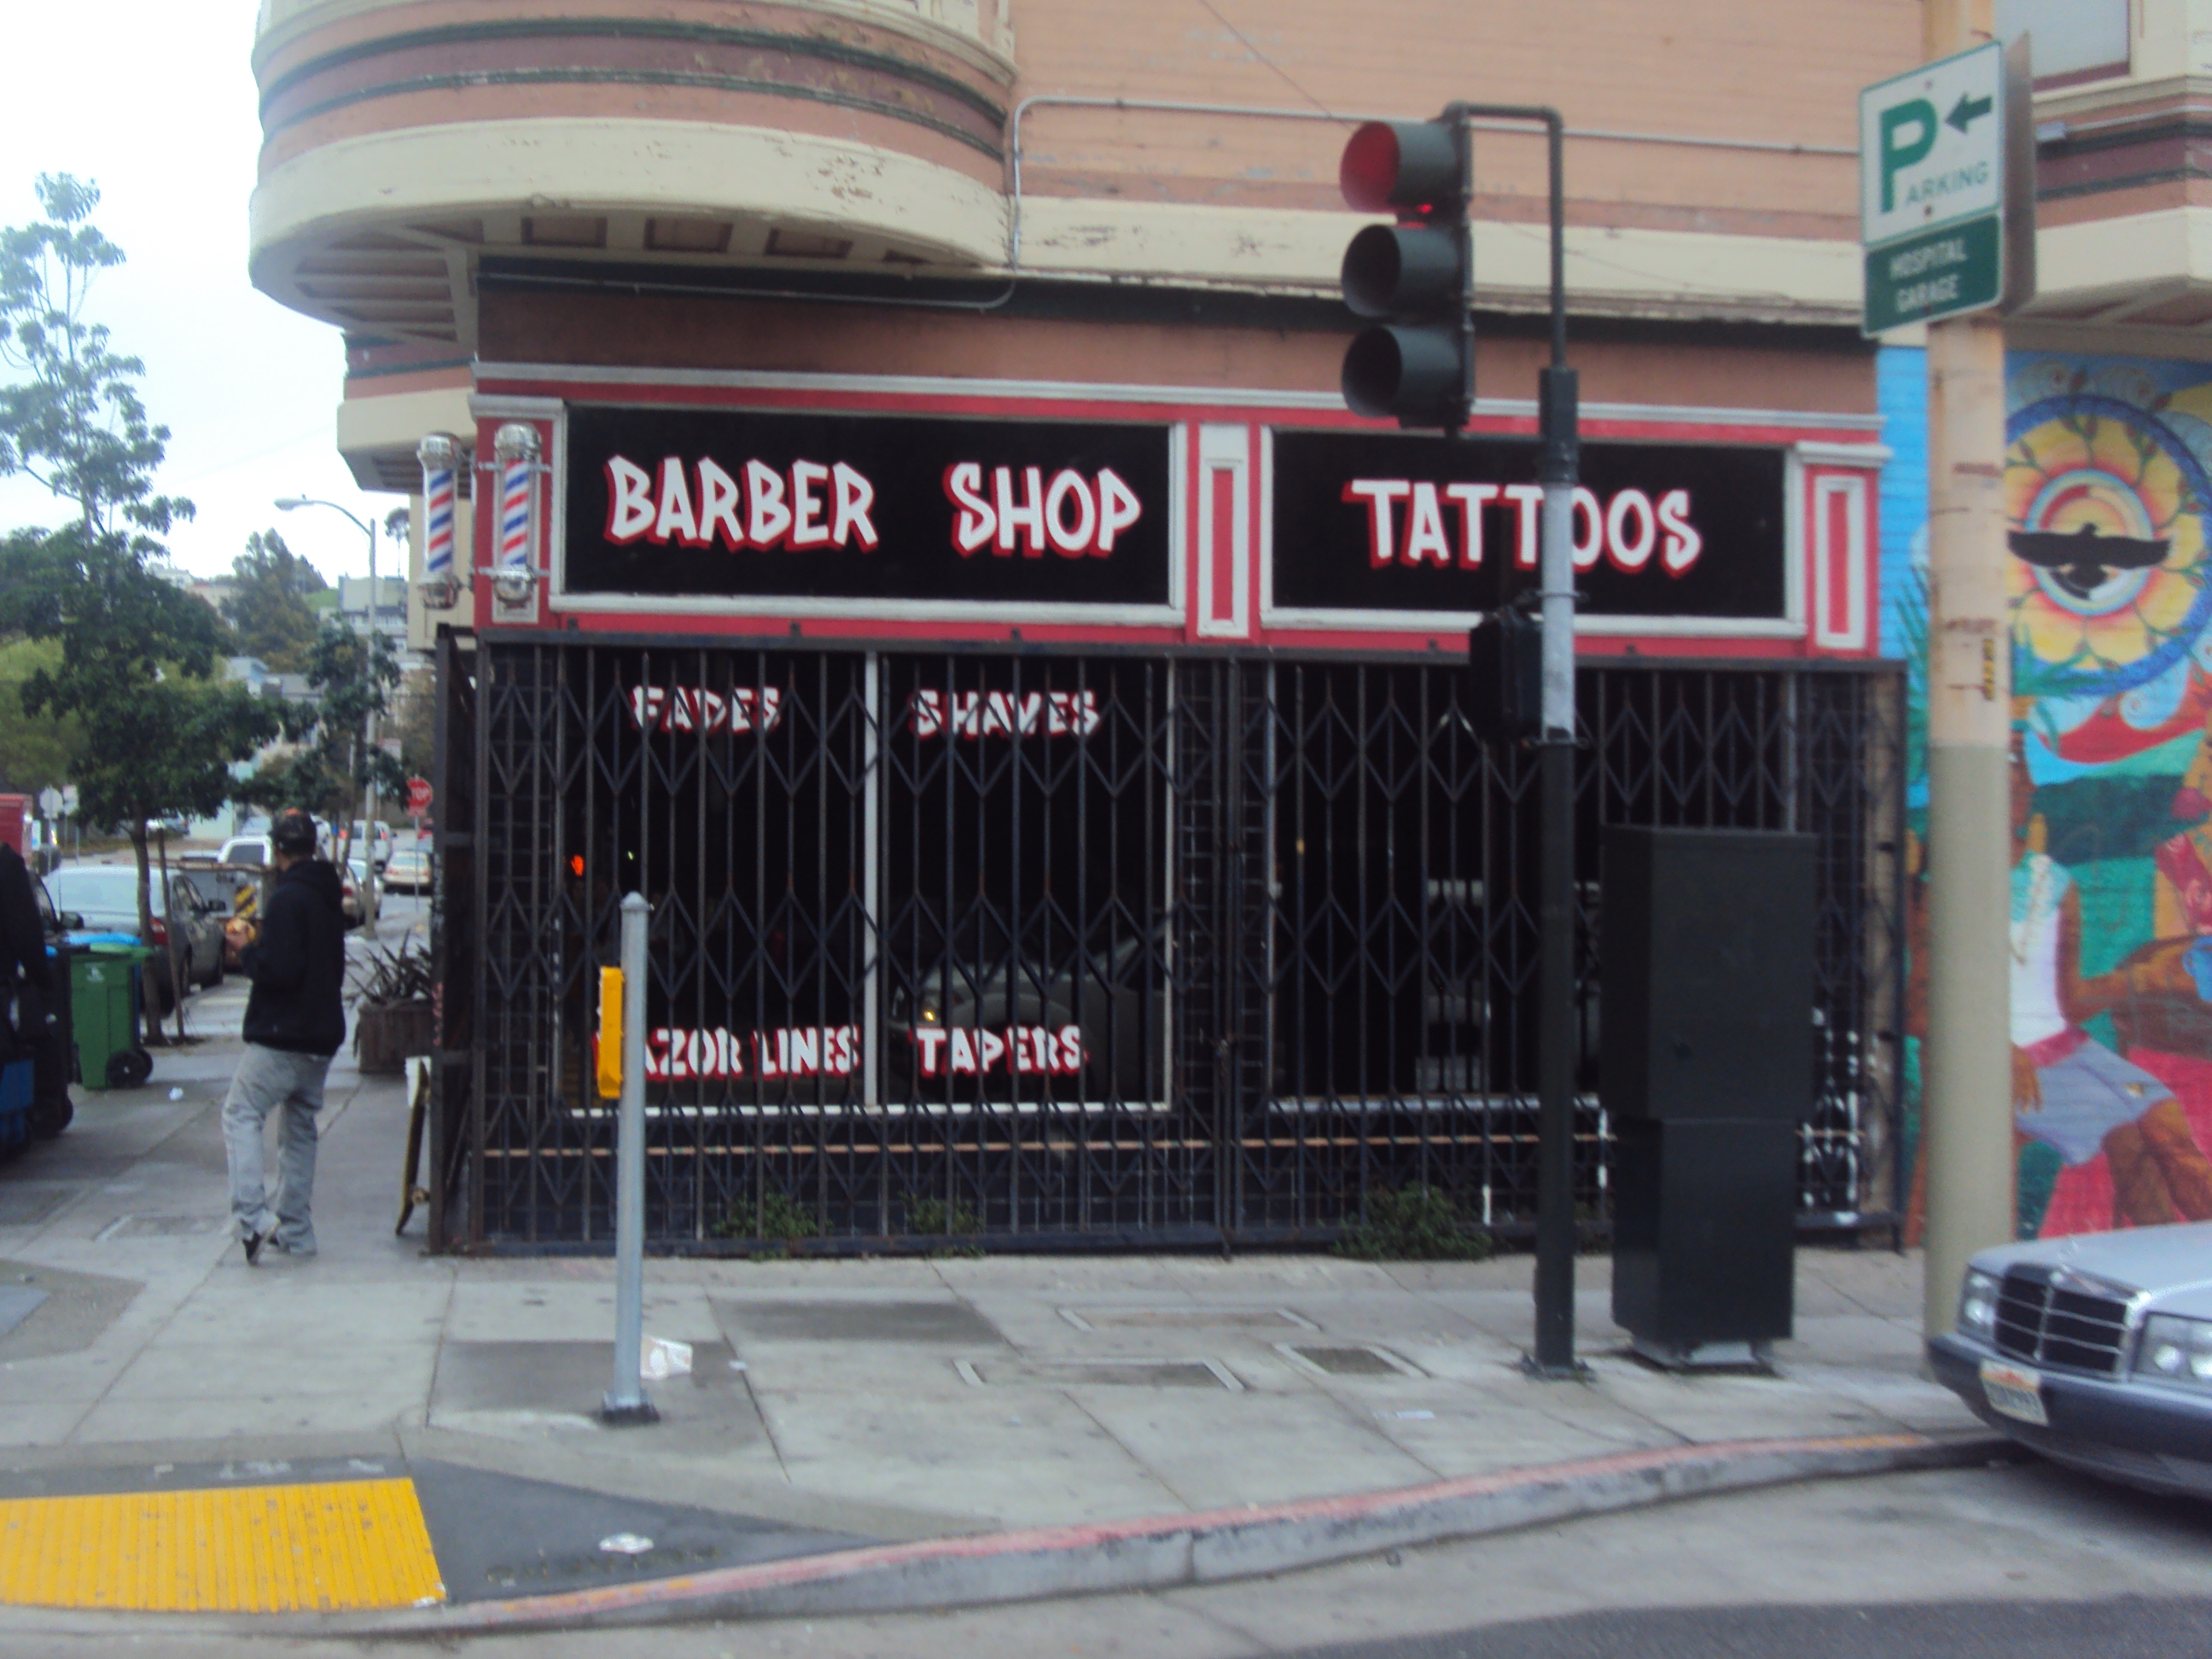 There are many tattoo shops in